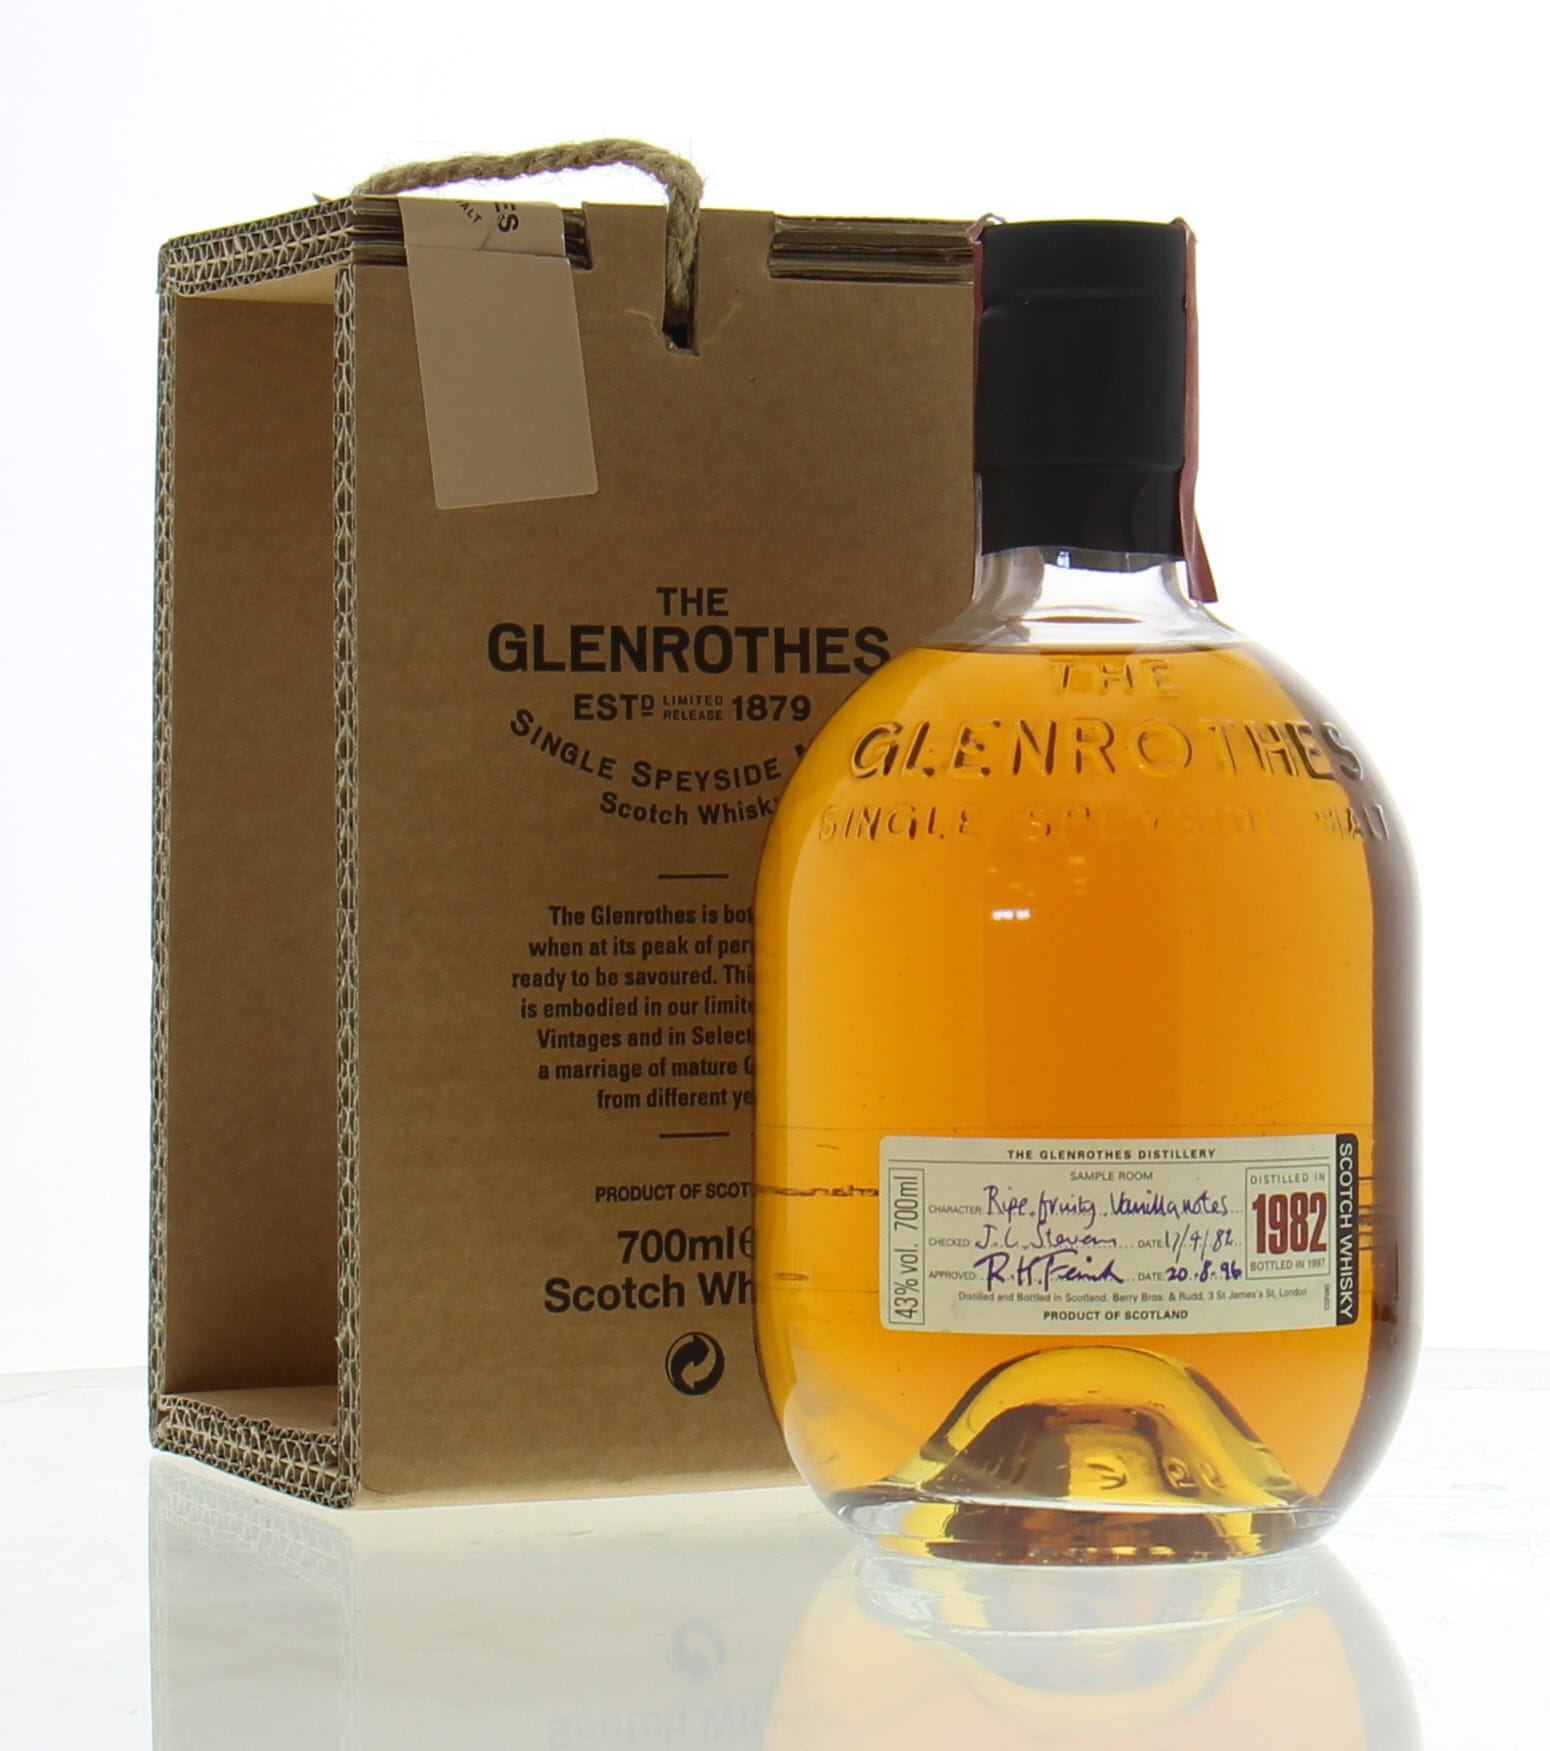 Glenrothes - 1982 Approved: 20.08.96 43% 1982 In Original Container